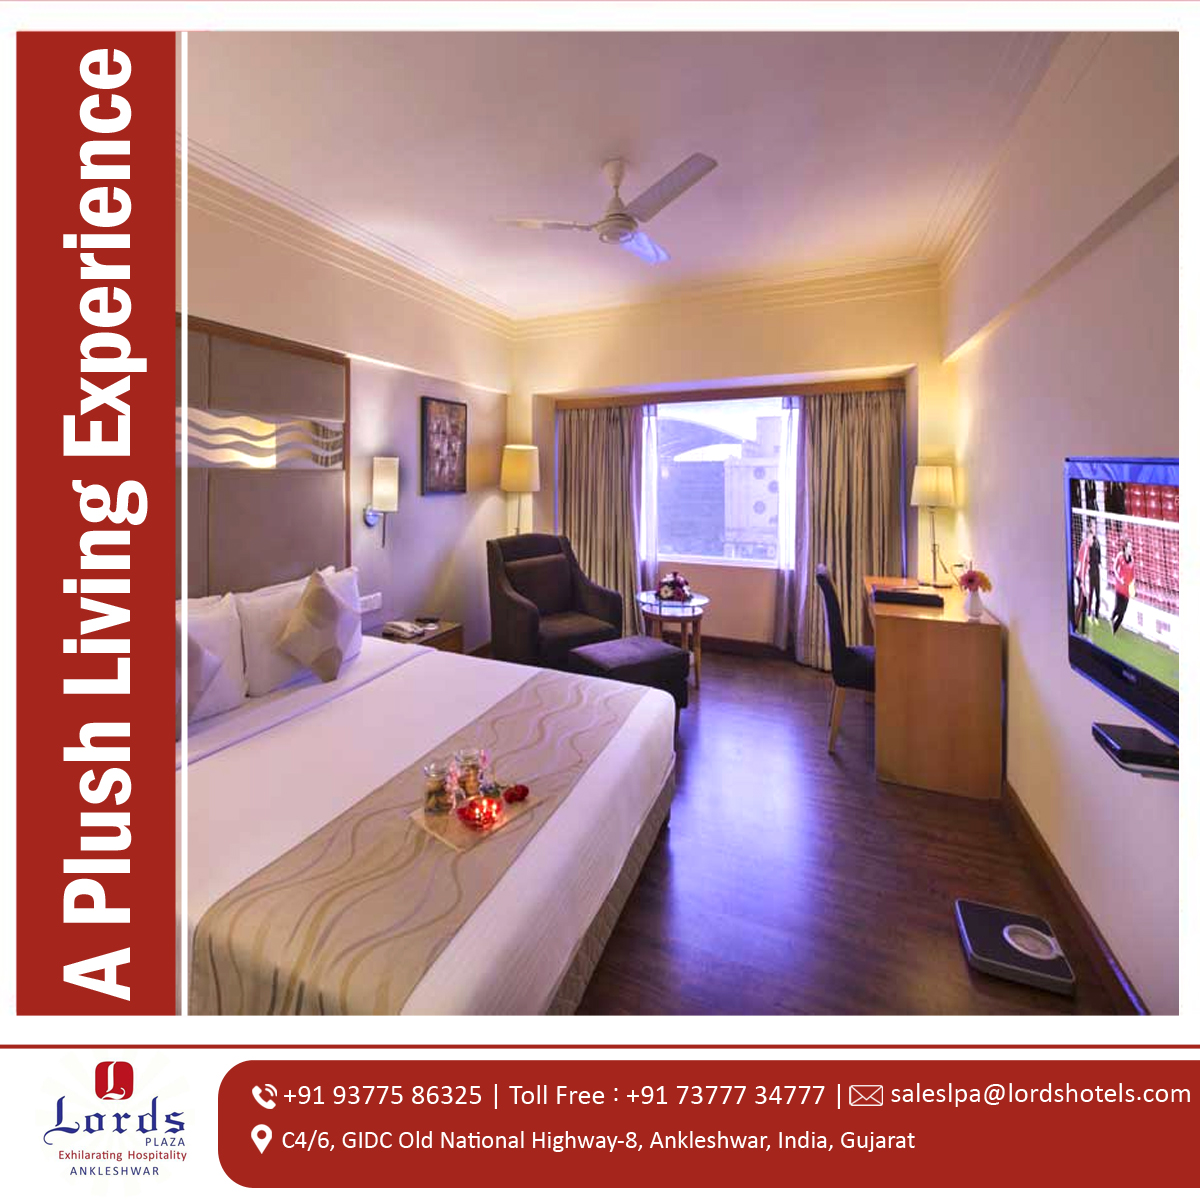 Here at #LordsPlaza, we strive to provide you with the friendliest of hospitality enriched with the most comfortable #stay.

𝐕𝐢𝐬𝐢𝐭 𝐎𝐮𝐫 𝐖𝐞𝐛𝐬𝐢𝐭𝐞: bit.ly/4250sjD

#promotion #roomoffer #lordshotelsandresorts #websiteoffer #hotelrooms #LordsPlazaAnkleshwar